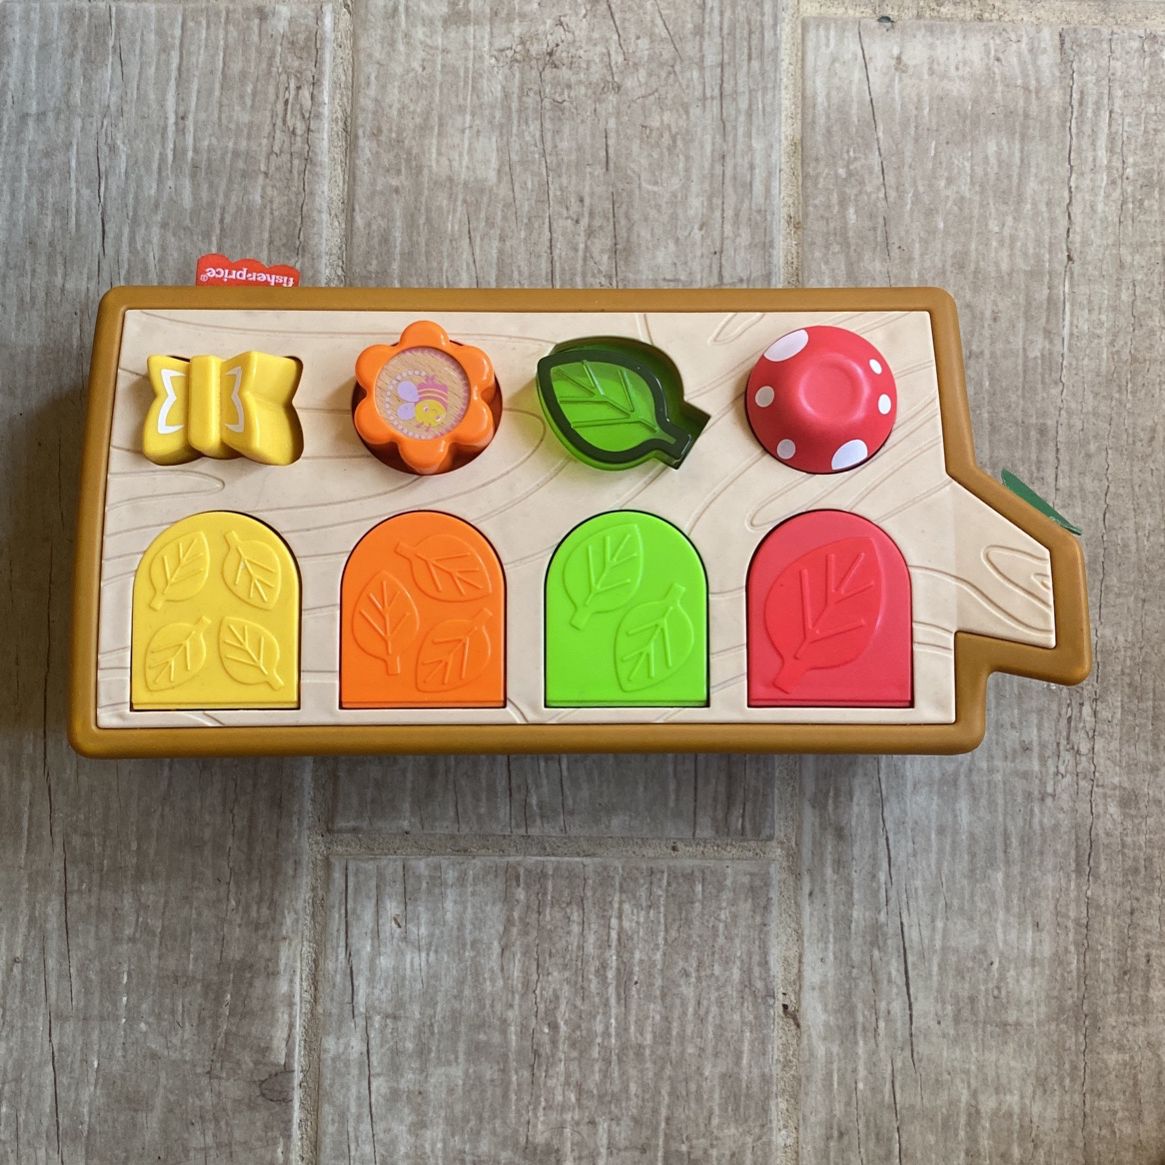 Fisher price toy $3